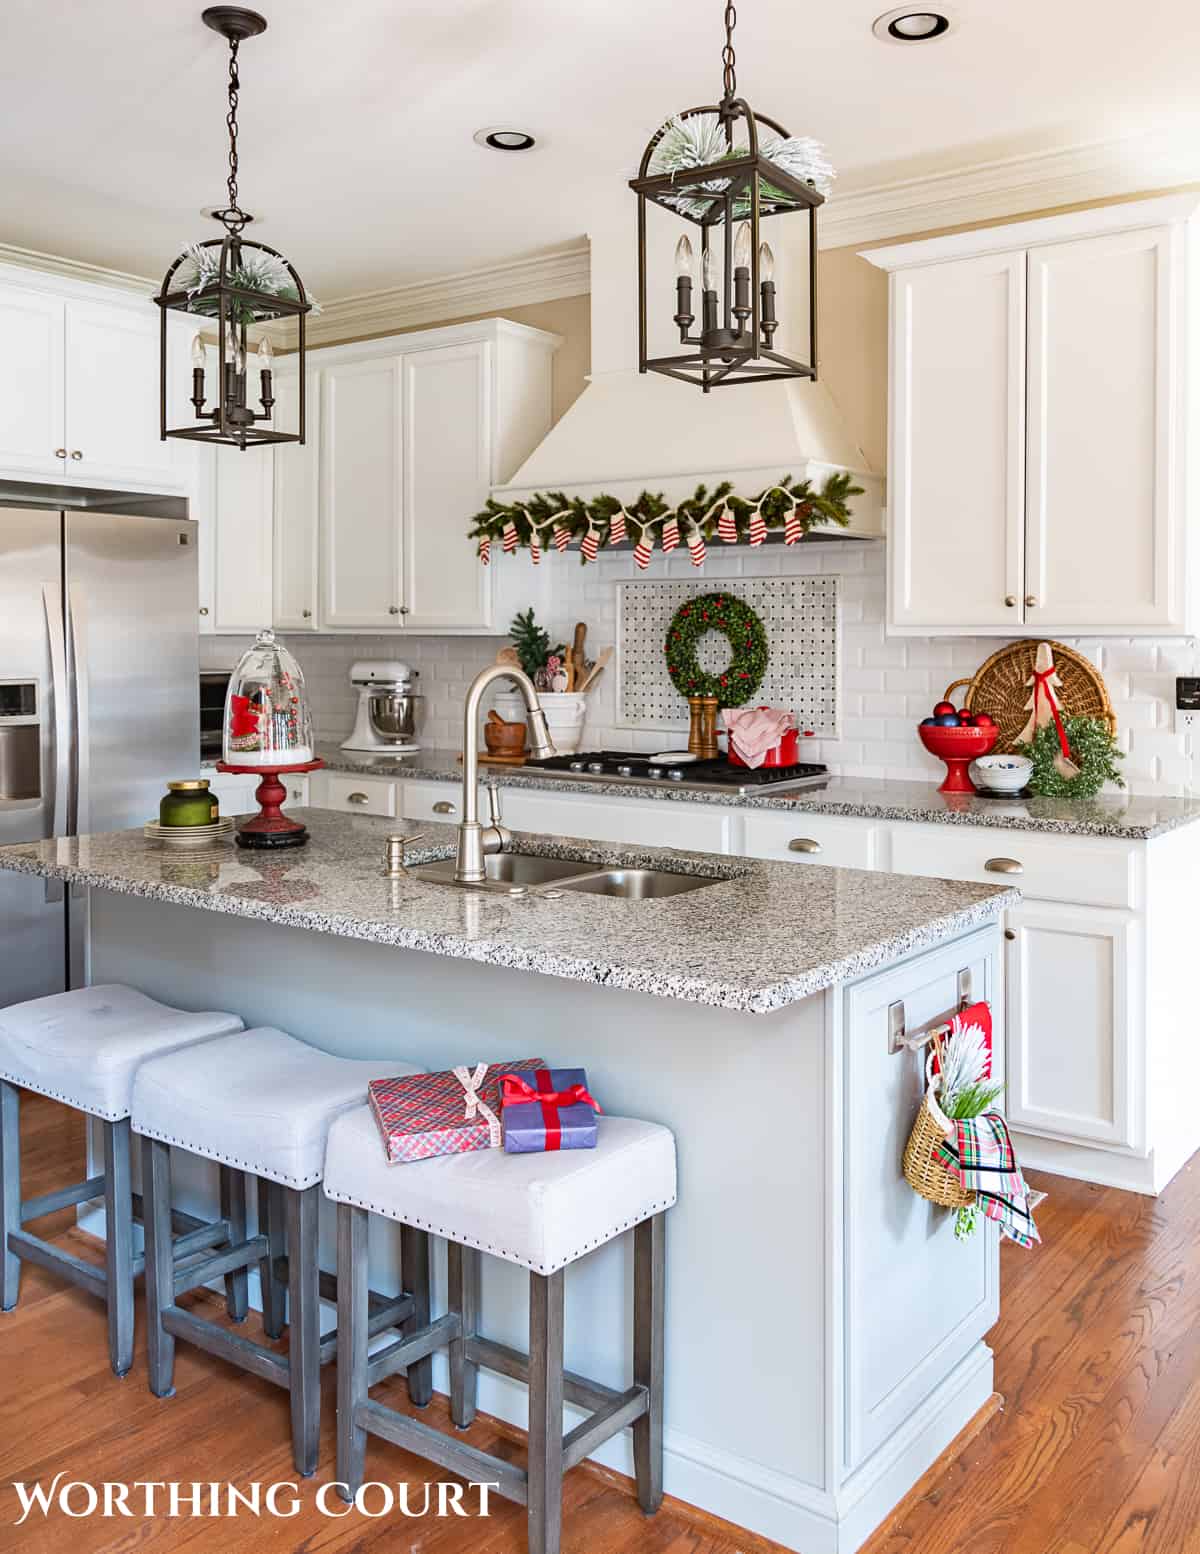 Christmas decorations in kitchen with white cabinets and a gray island